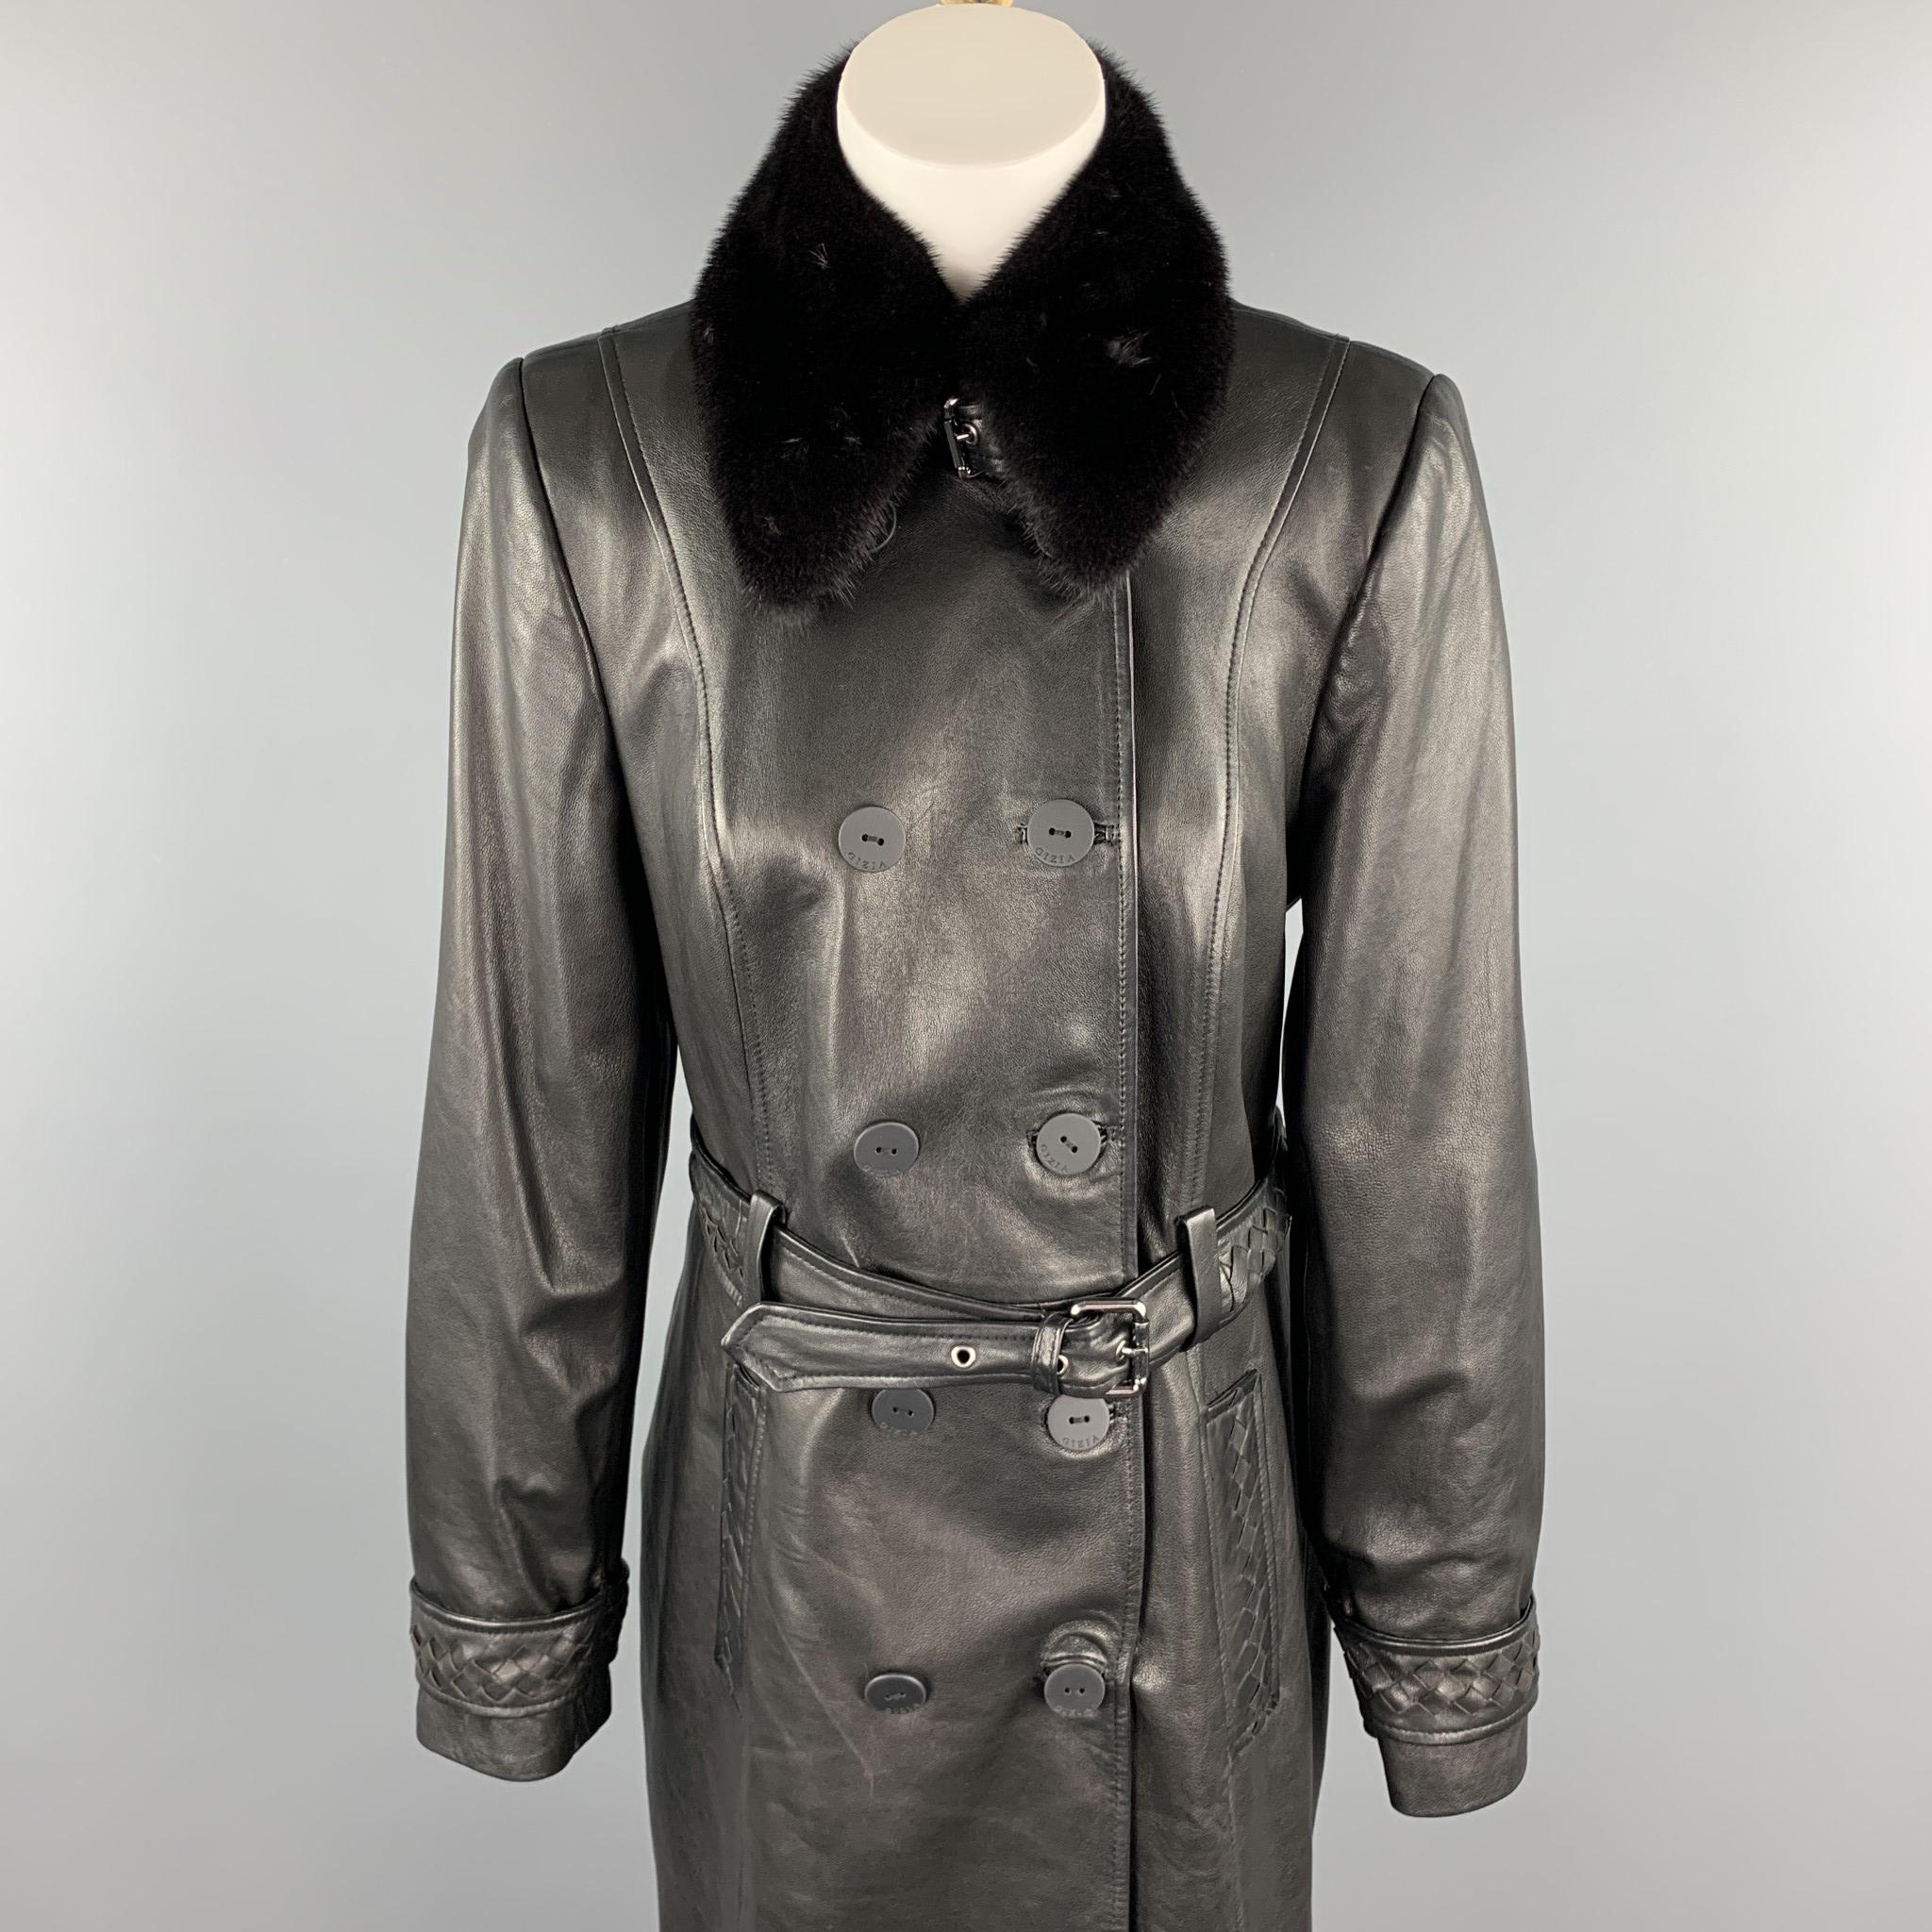 GIZIA coat comes in a black leather with a full liner featuring a fur collar detail, belted, braided cuffs, and a double breasted closure.

Excellent Pre-Owned Condition.
Marked: 40

Measurements:

Shoulder: 15.5 in. 
Chest: 36 in. 
Sleeve: 25.5 in.